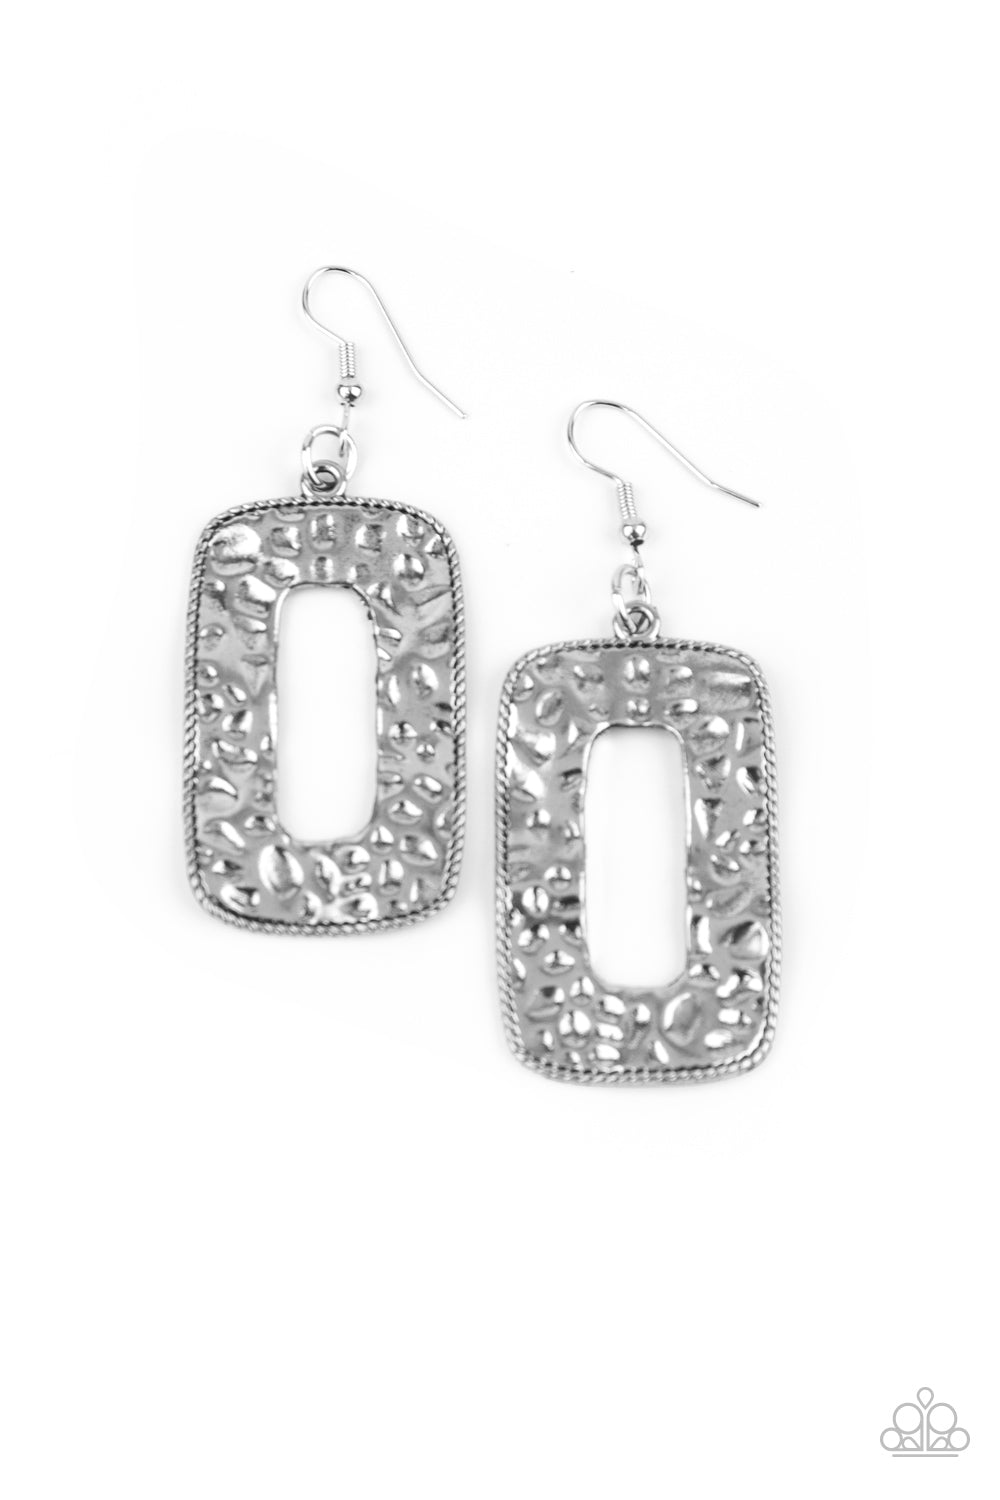 Paparazzi Primal Elements - Silver Earrings - A Finishing Touch 